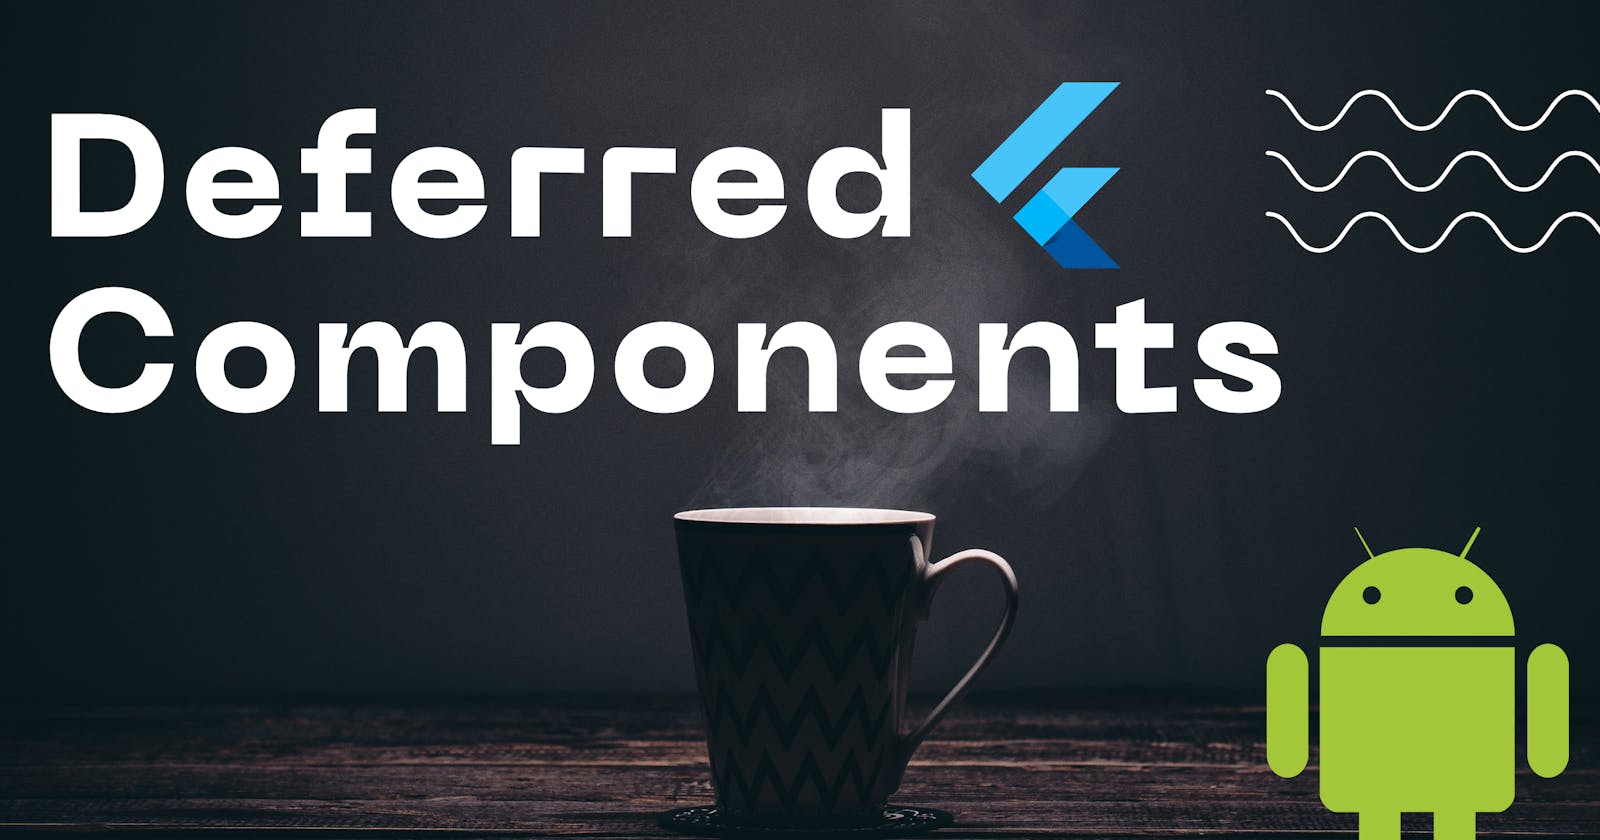 Learn How to Use Deferred Components in Flutter for Improved Performance